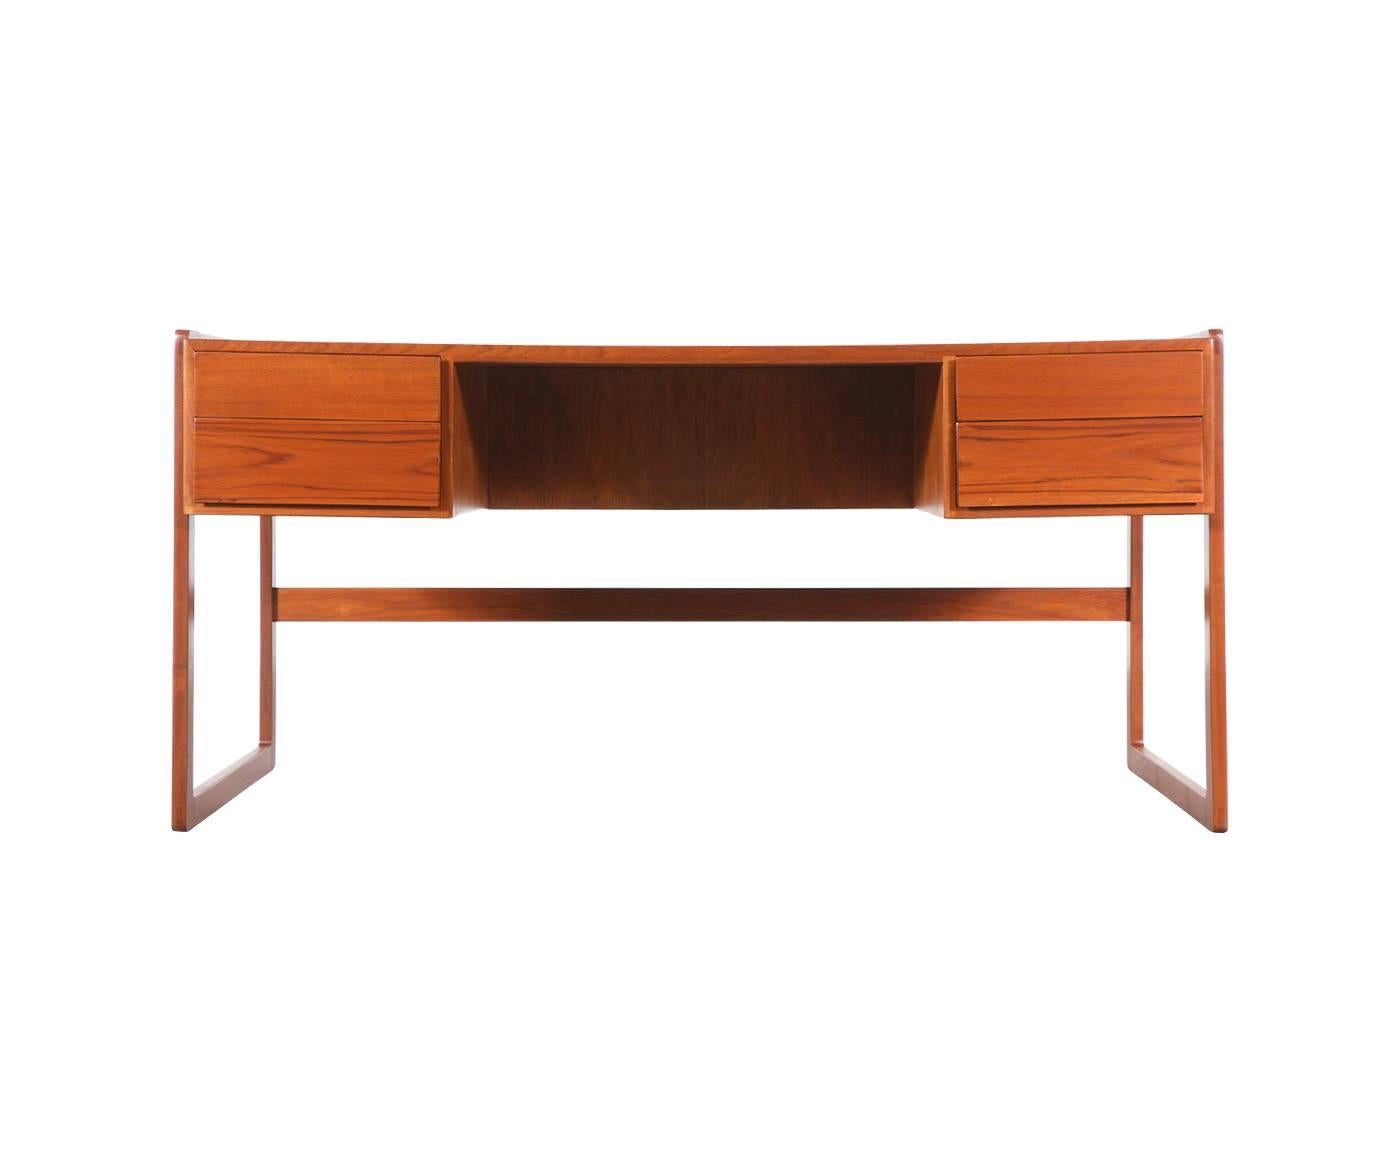 Designer: Arne Hovmand-Olsen.
Manufacturer: Mogens Kold.
Period/style: Danish Modern.
Country: Denmark.
Date: 1950s.

Dimensions: 28″ H x 59″ W x 30″ D.
Materials: Teak.
Condition: Excellent, newly refinished.
Number of items: 1.
Id